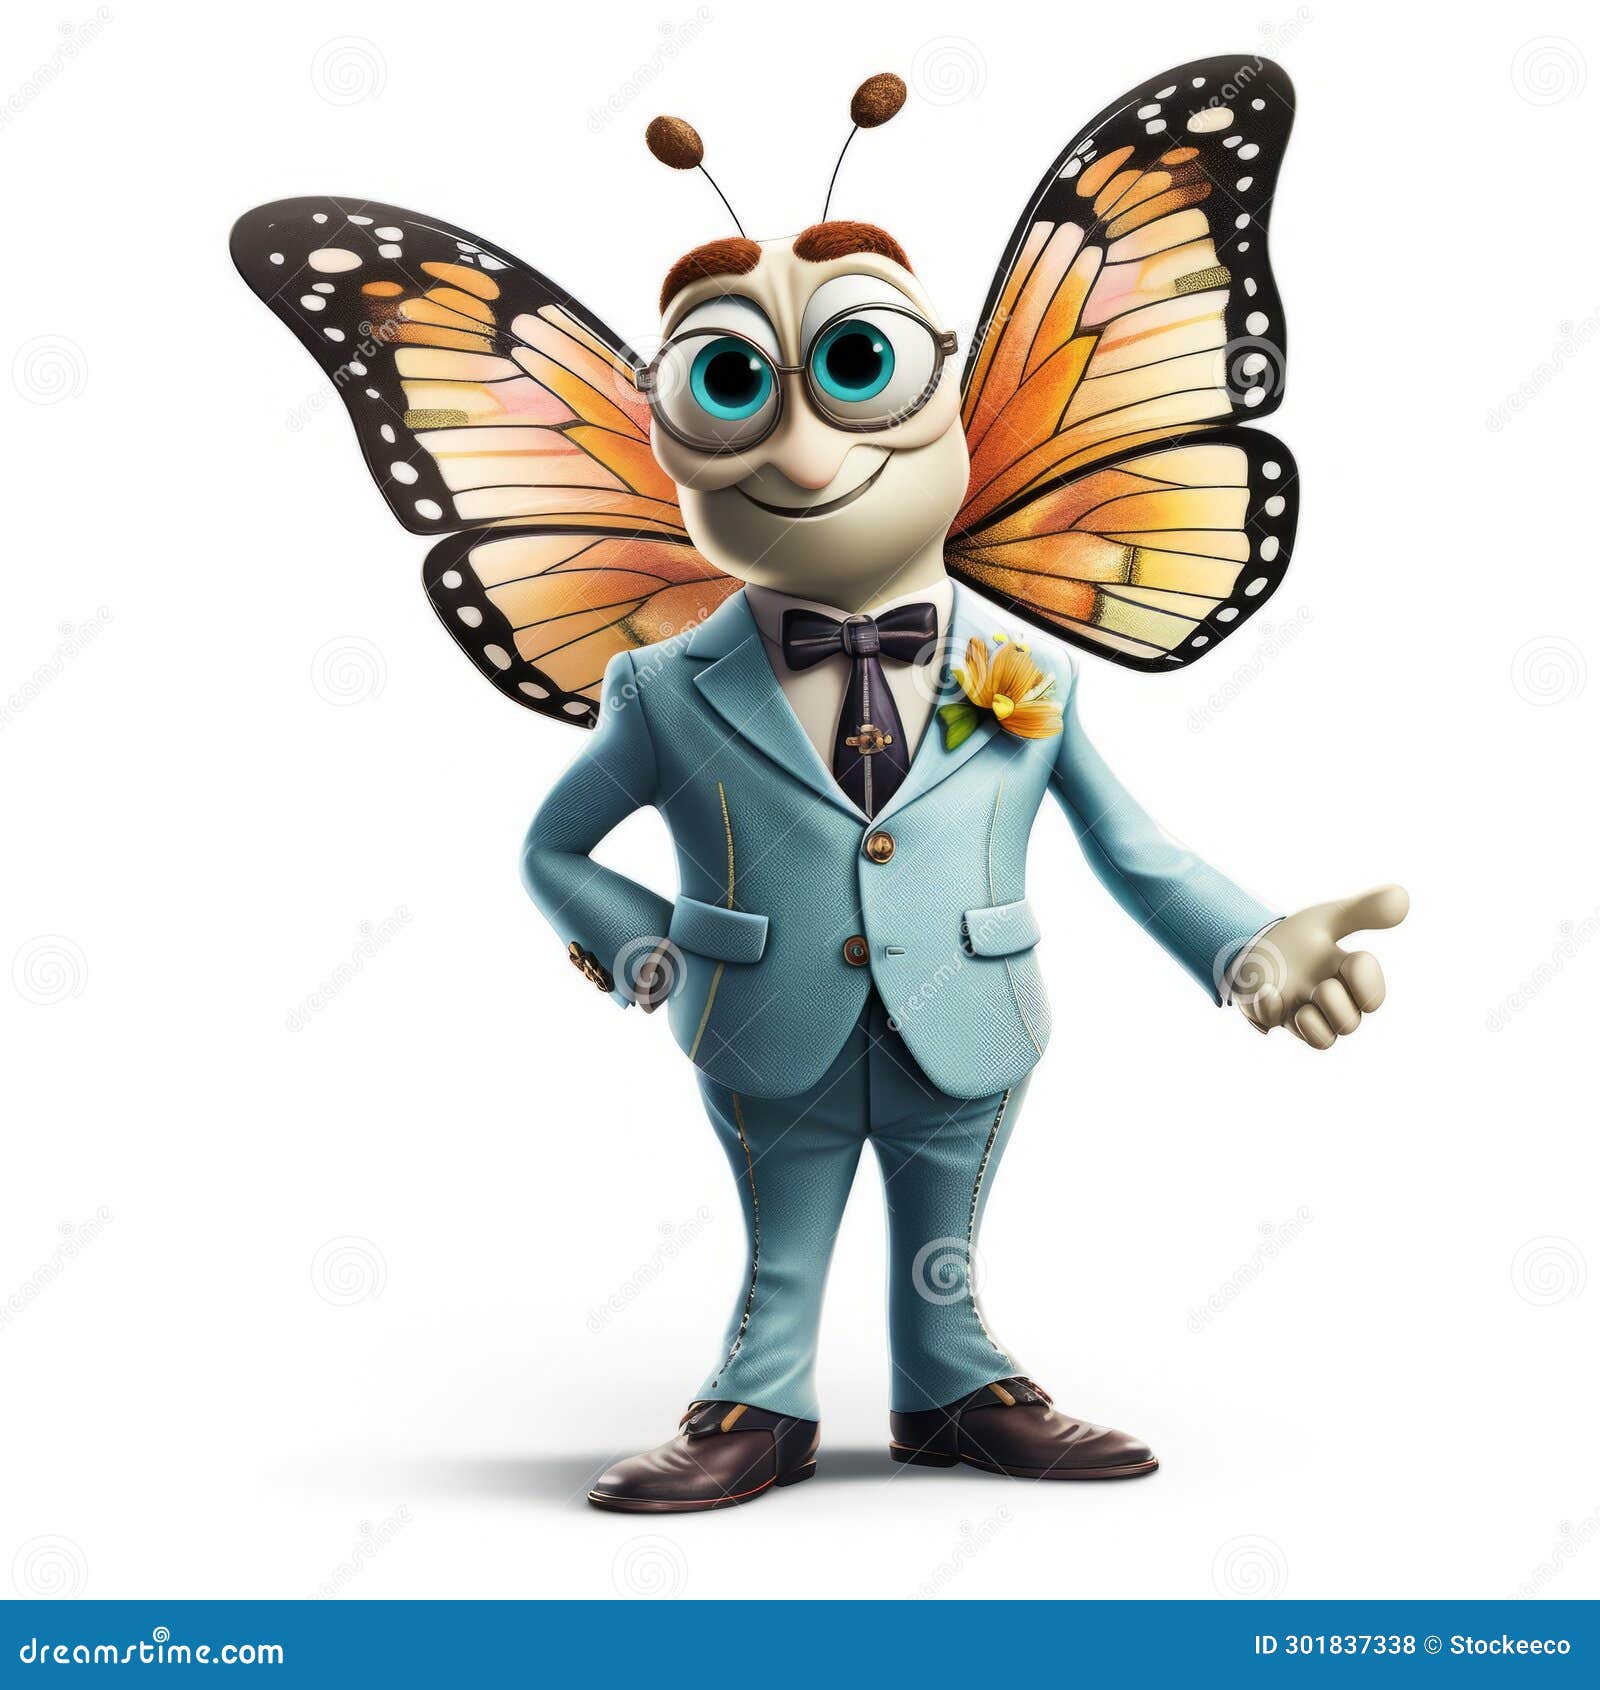 sophisticated frenchy: a photorealistic cartoon man in a butterfly costume